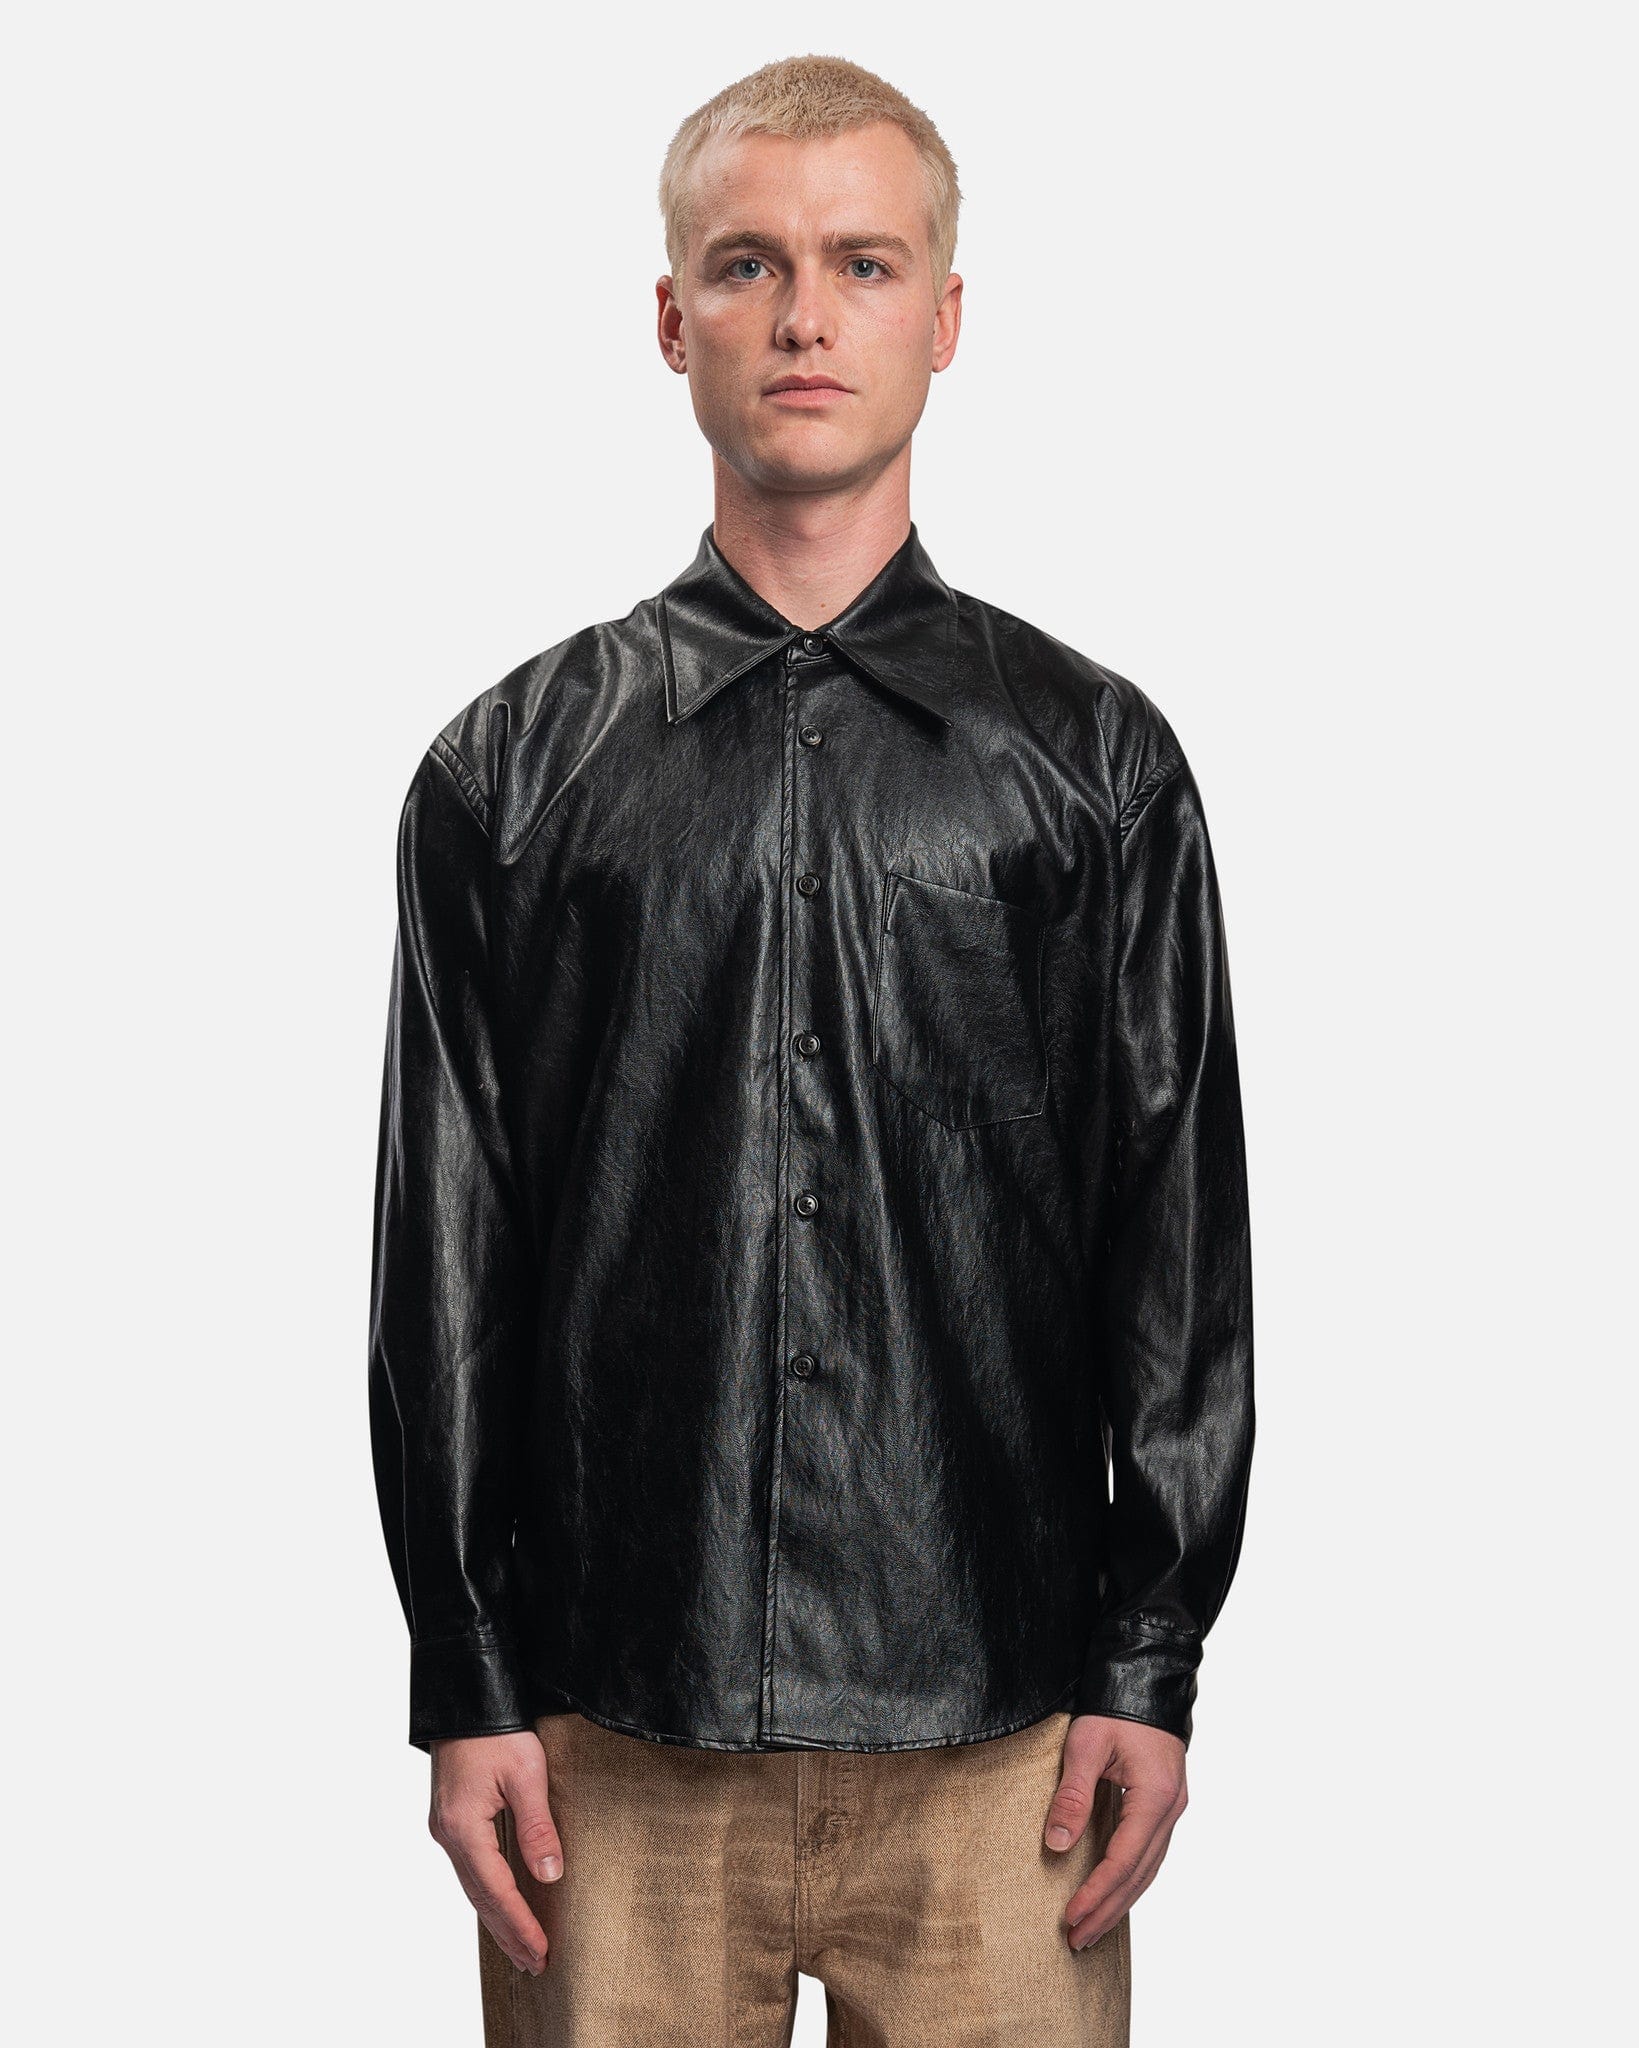 Coco 70's Shirt in Cageian Black Fake Leather – SVRN